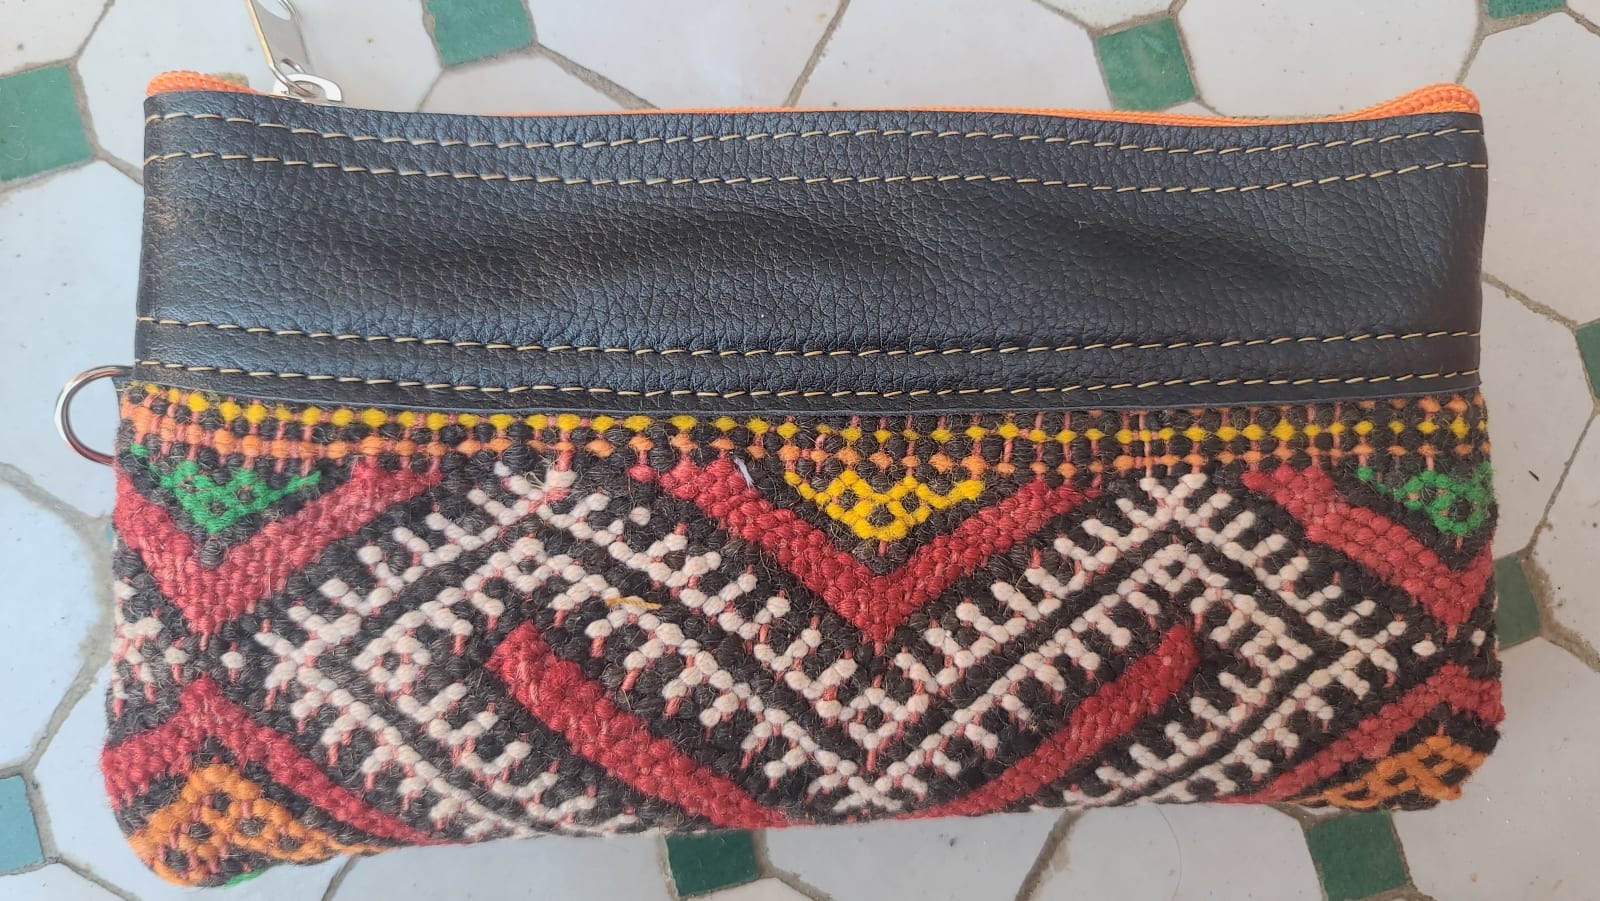   small bag thread and leather Colored Morocco